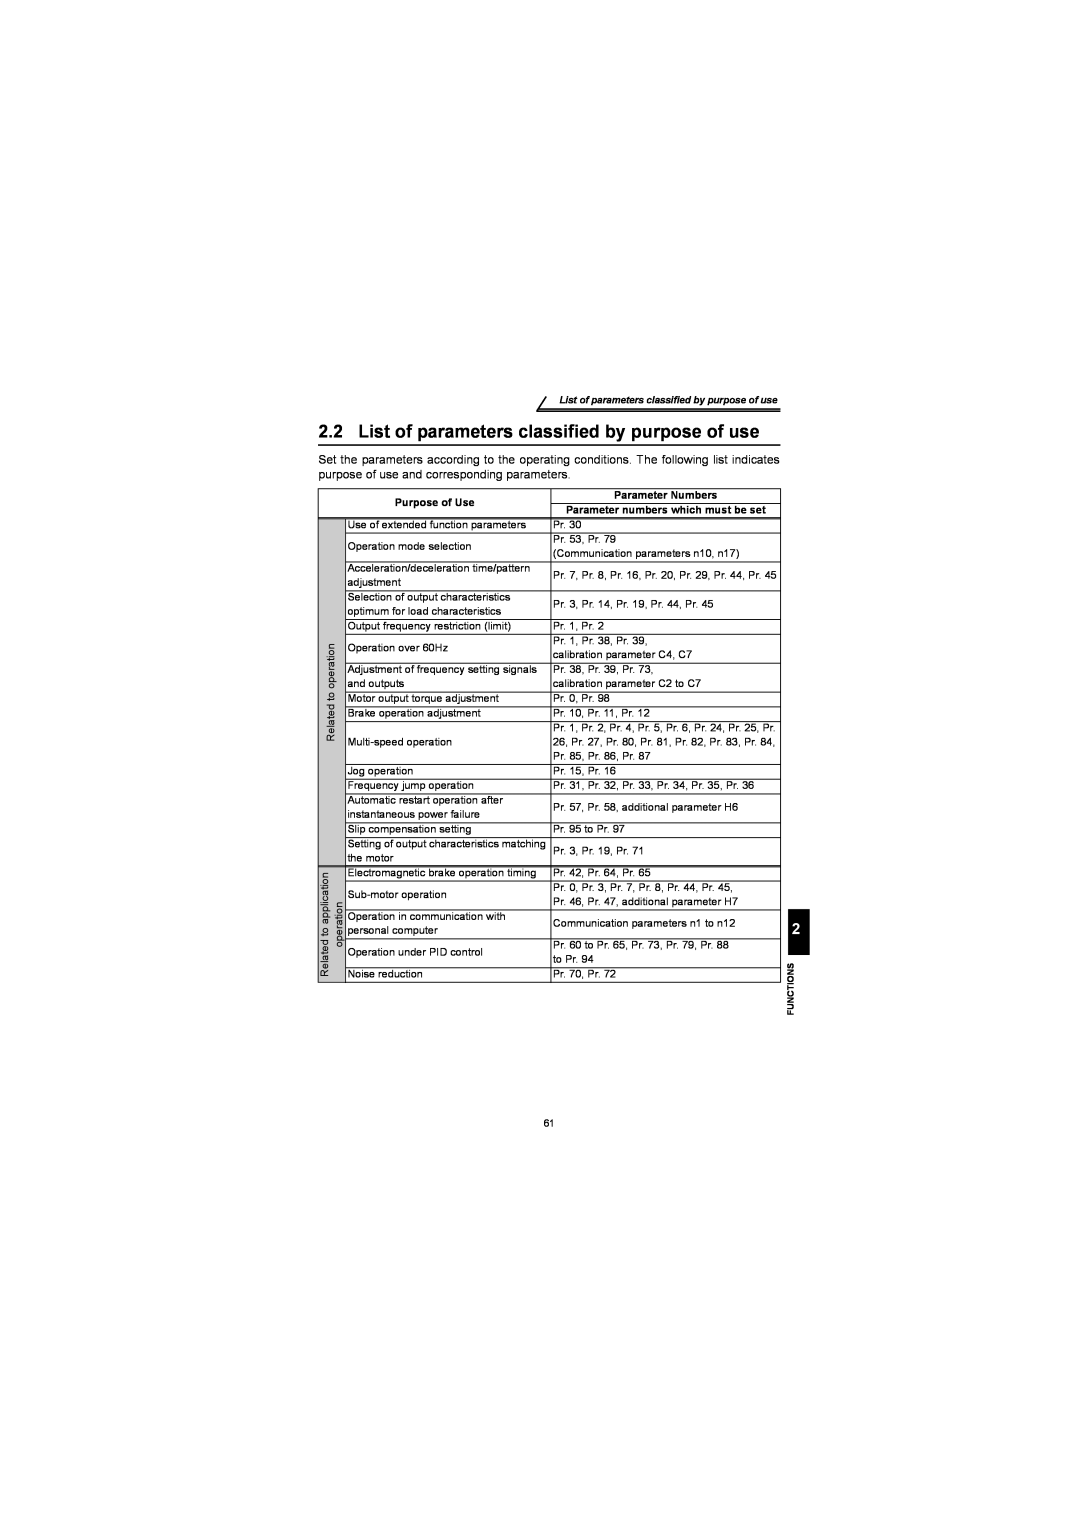 Mitsubishi Electronics FR-S500 instruction manual List of parameters classified by purpose of use 